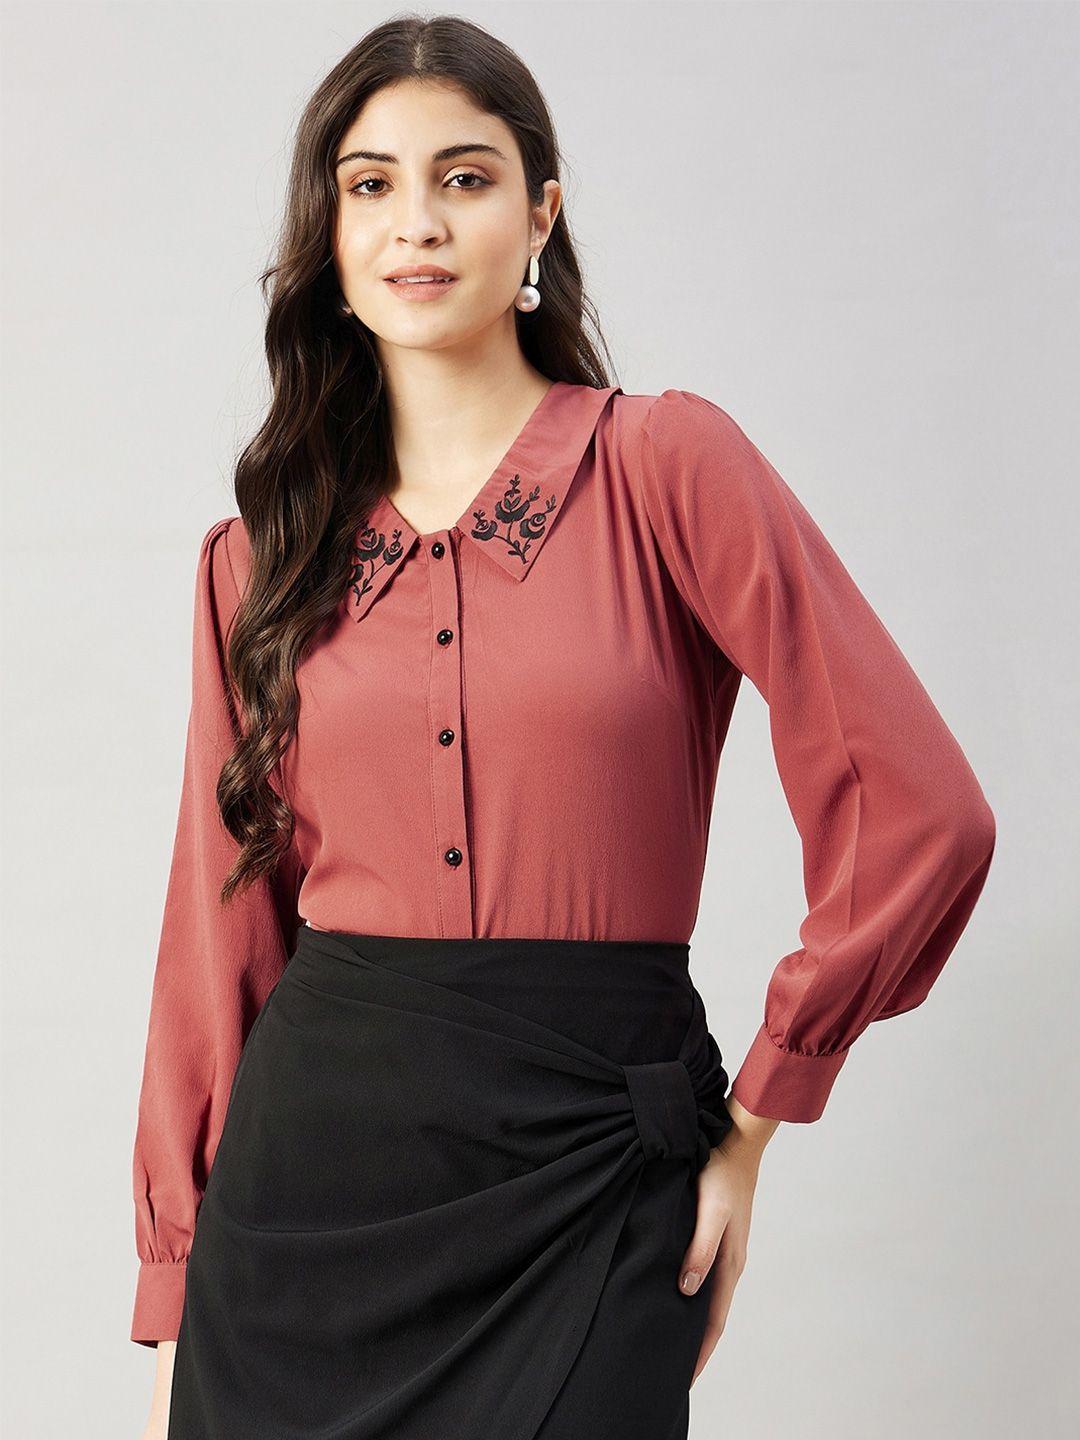 winered floral embroidered shirt style top